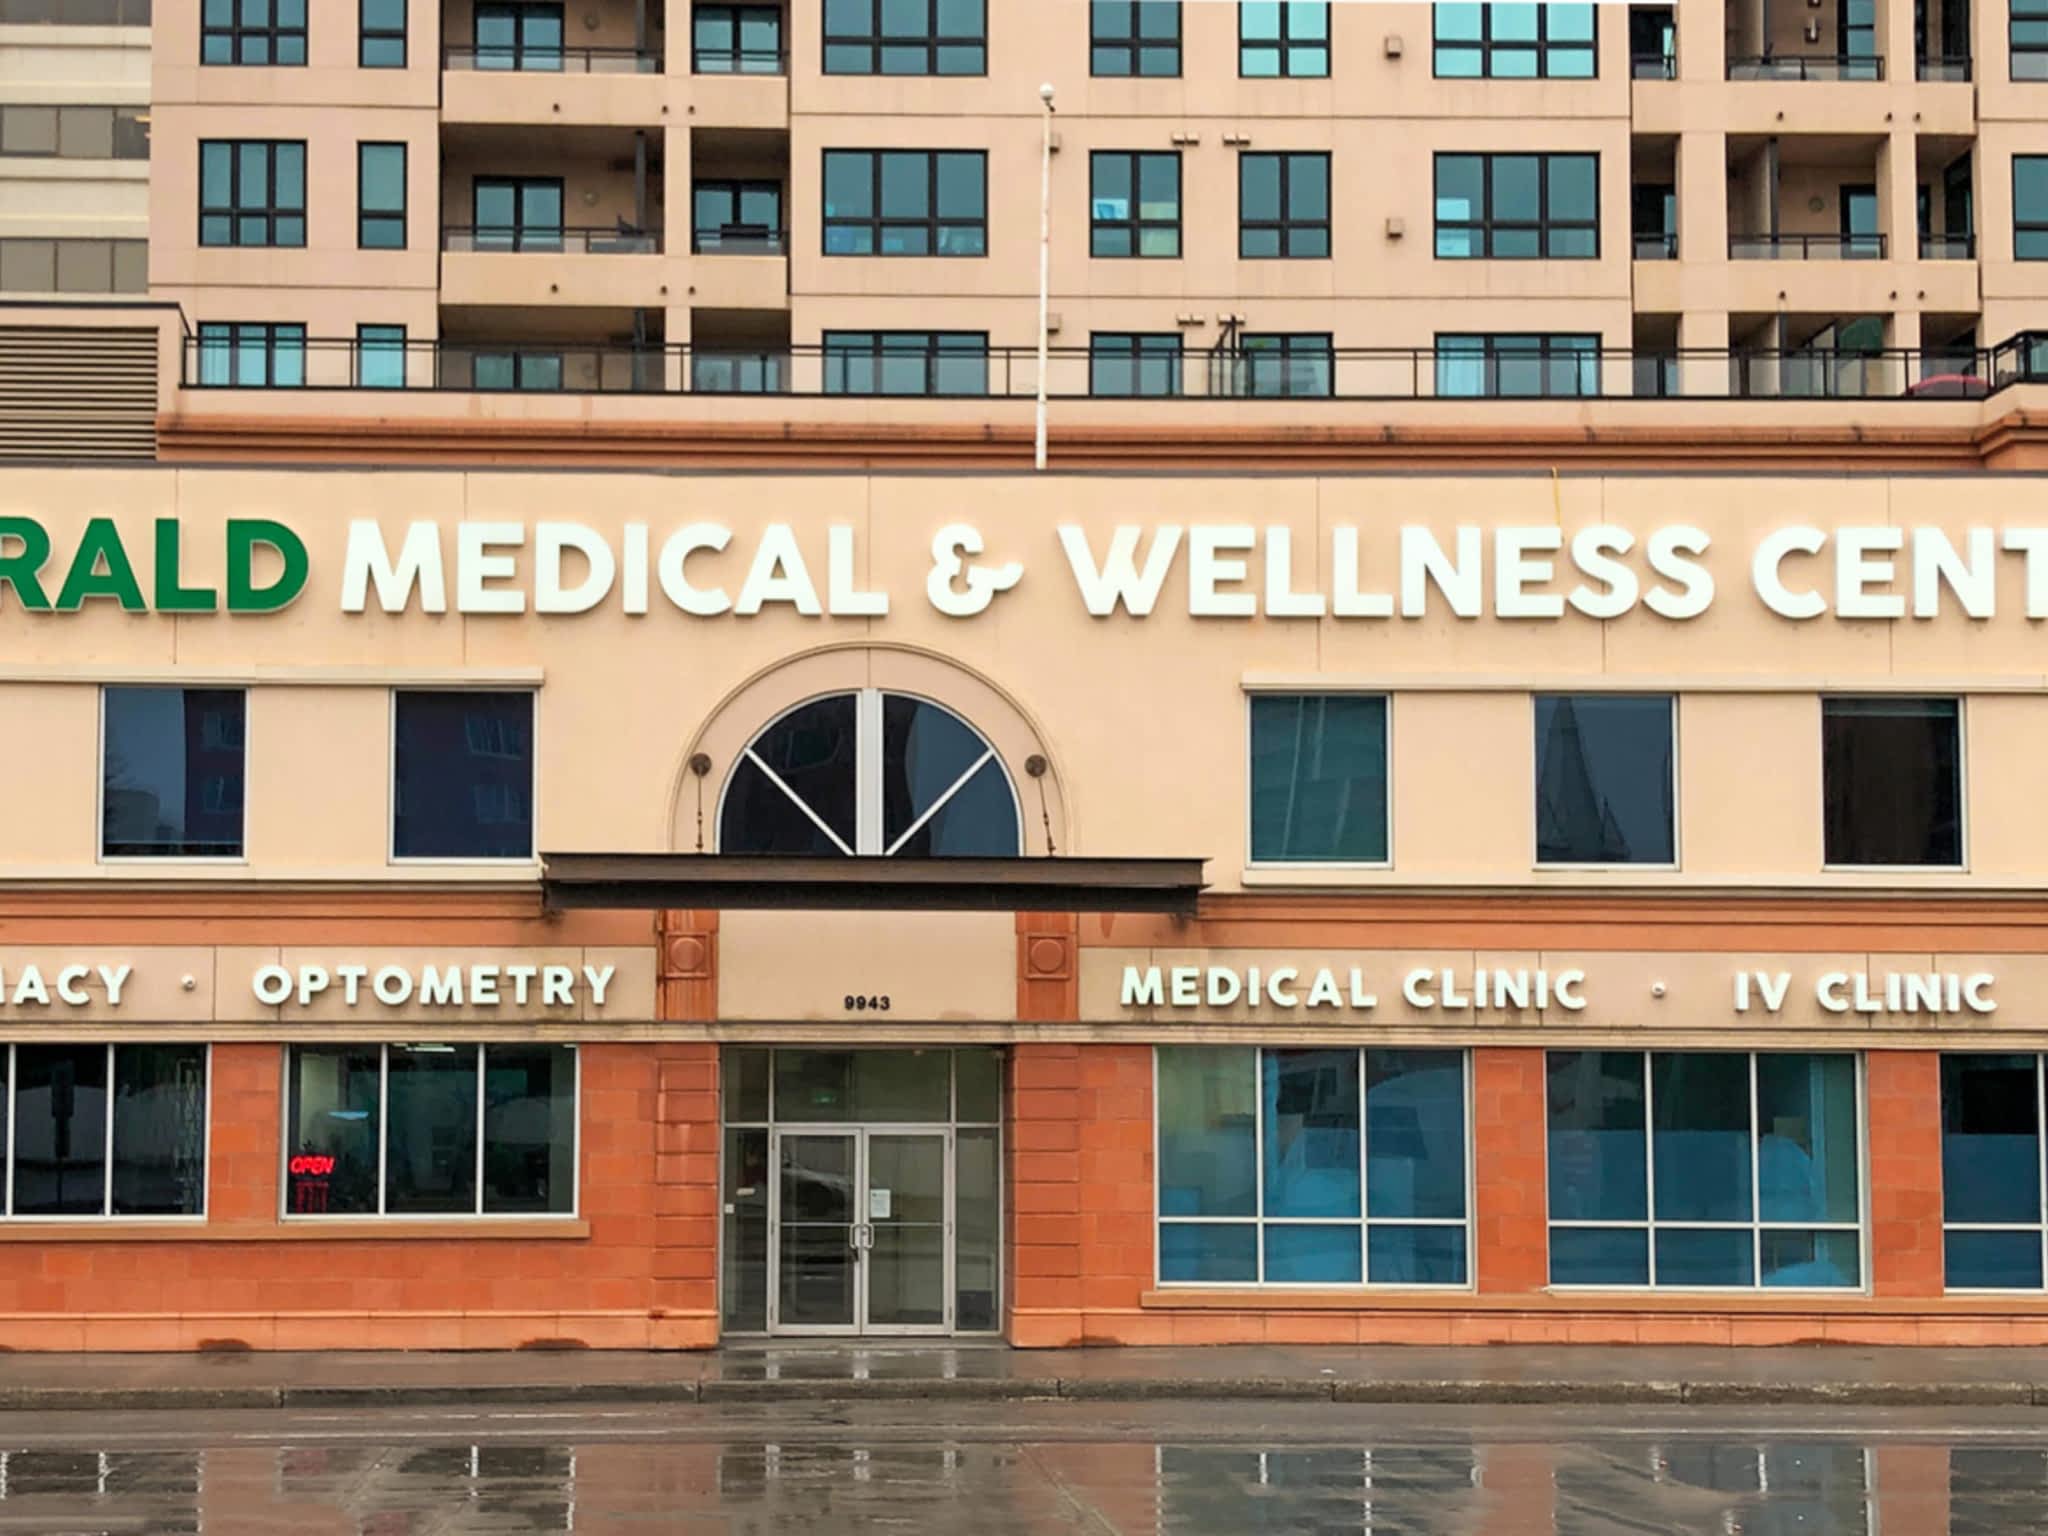 photo Emerald Wellness and Medical Centre